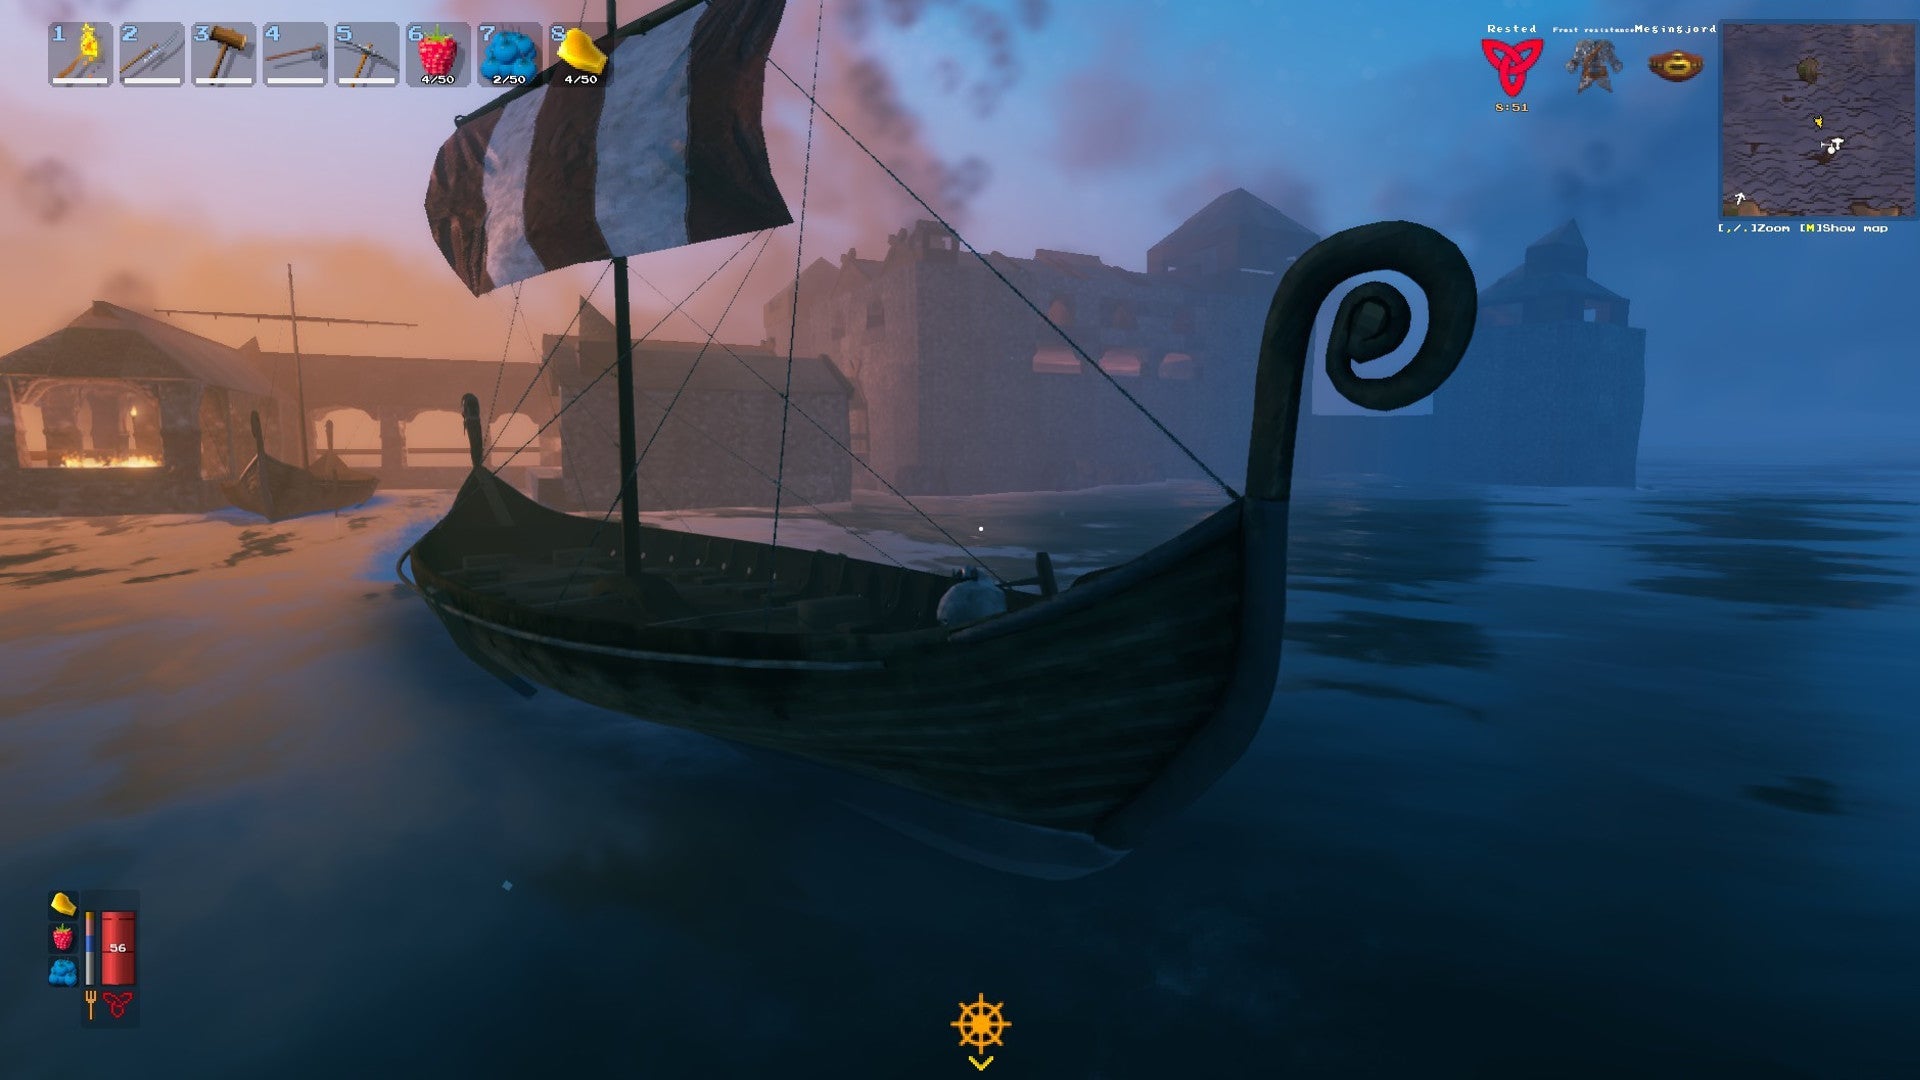 A Valheim screenshot of a Longboat in the sea, with a settlement in the background.